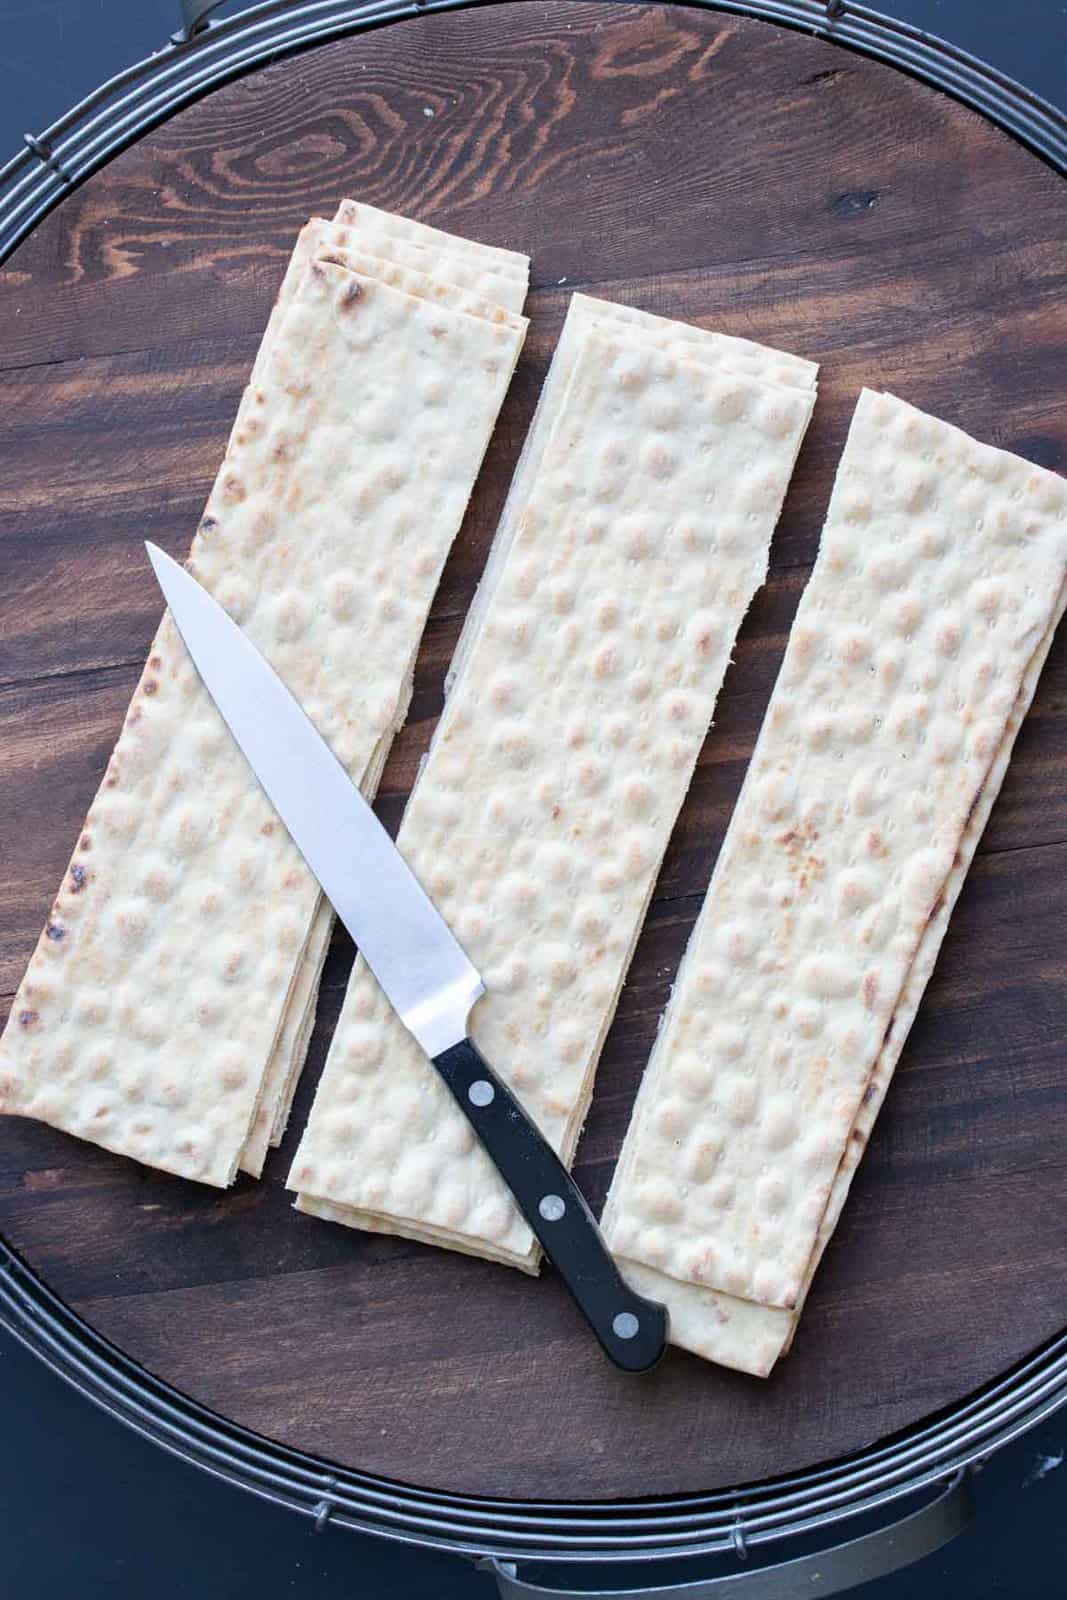 Knife on top of sliced pieces of lavash bread